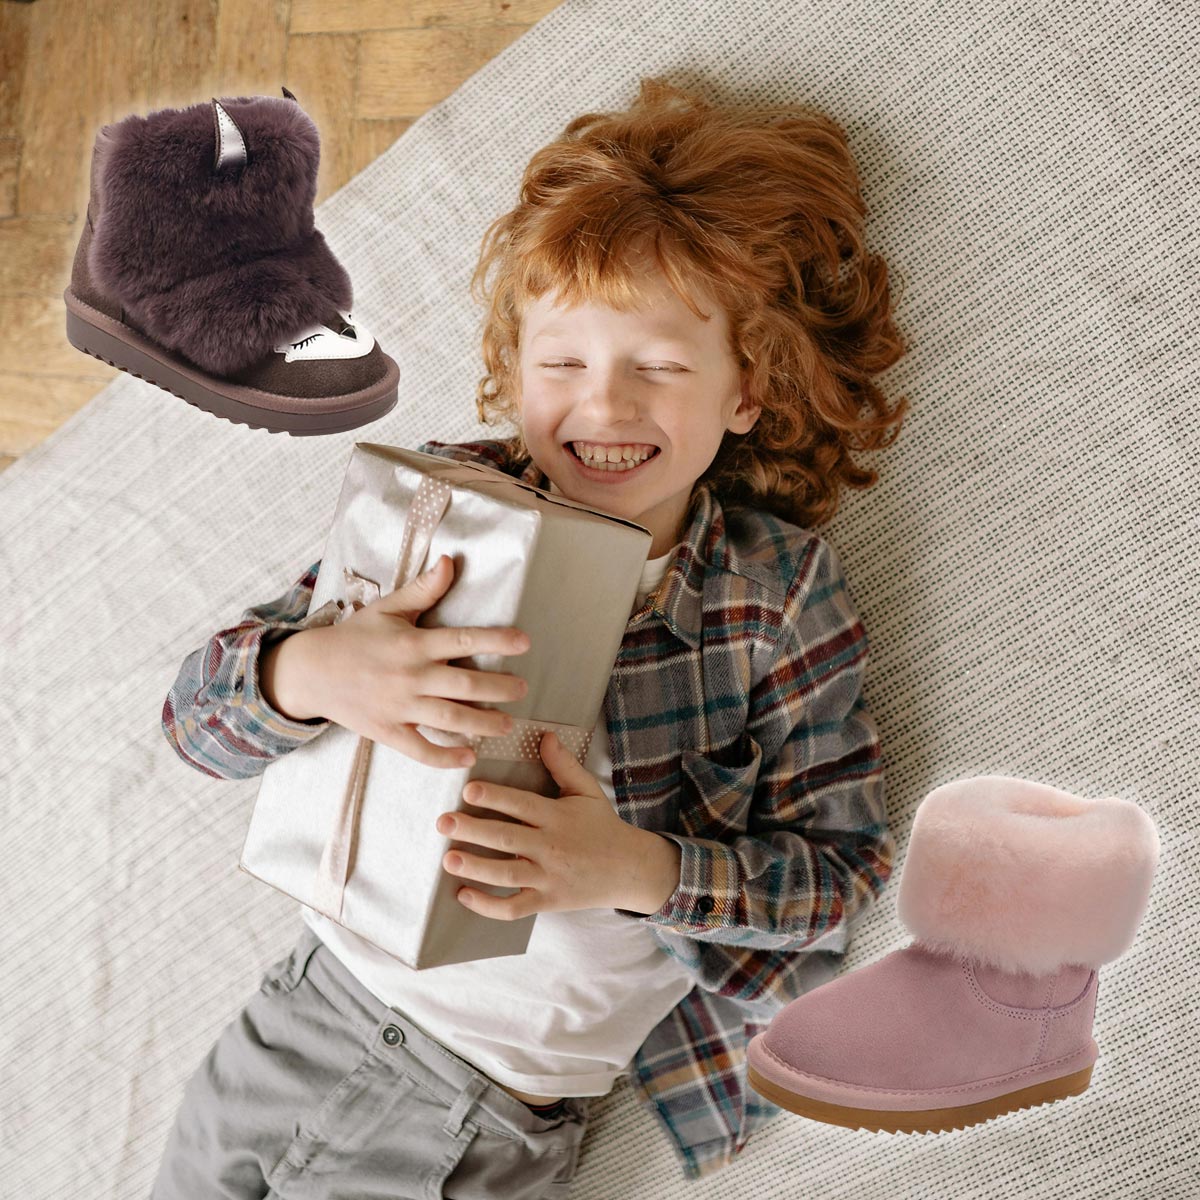 UGG boots as gifts for children